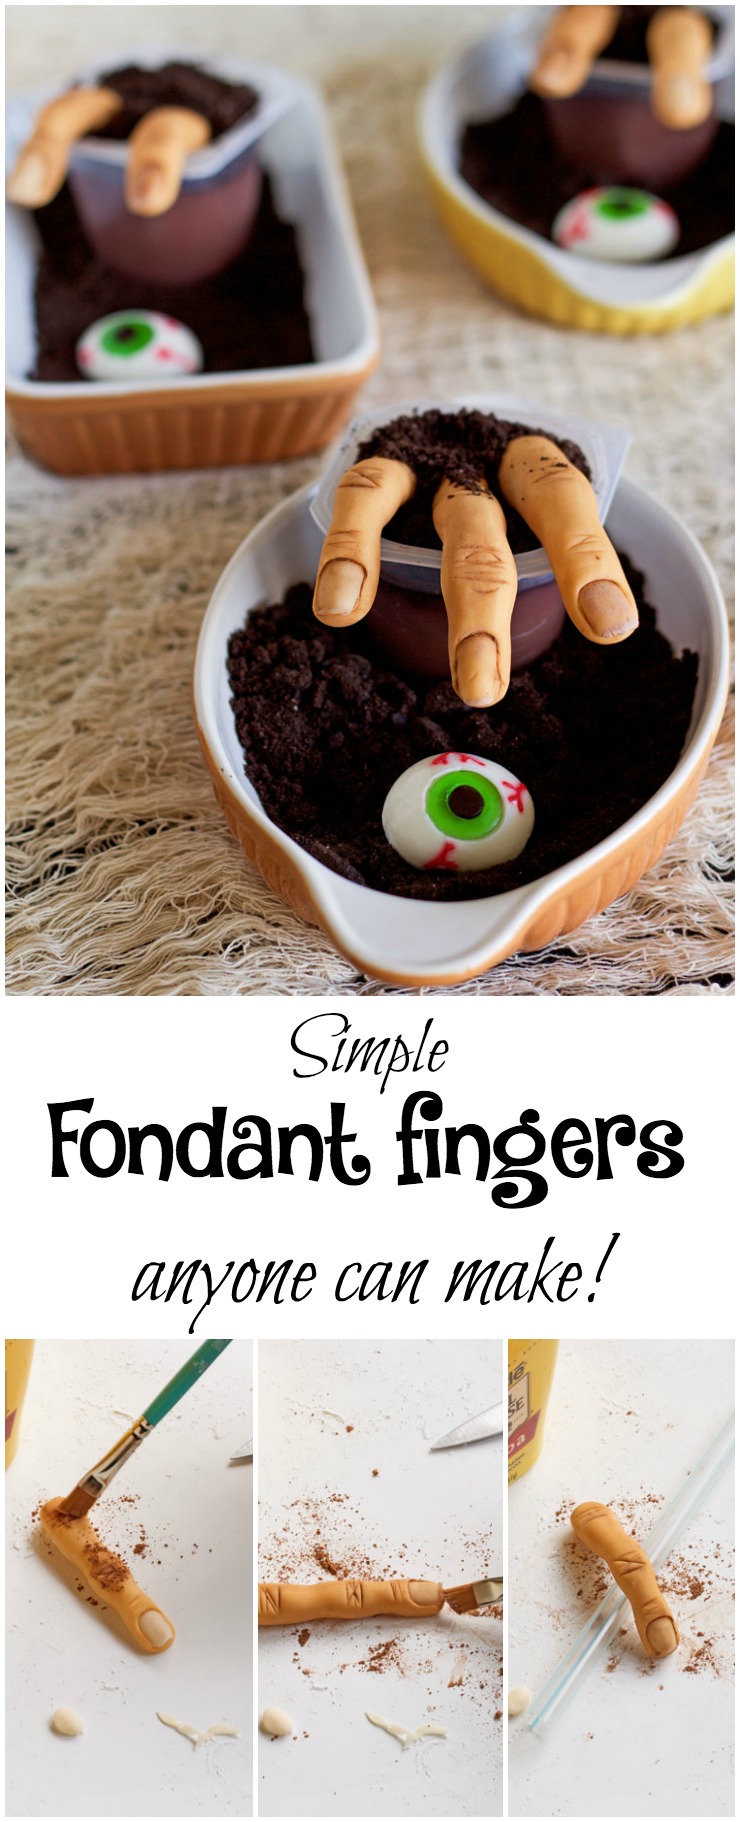 A Super Simple way to Make Fondant Fingers | The Bearfoot Baker